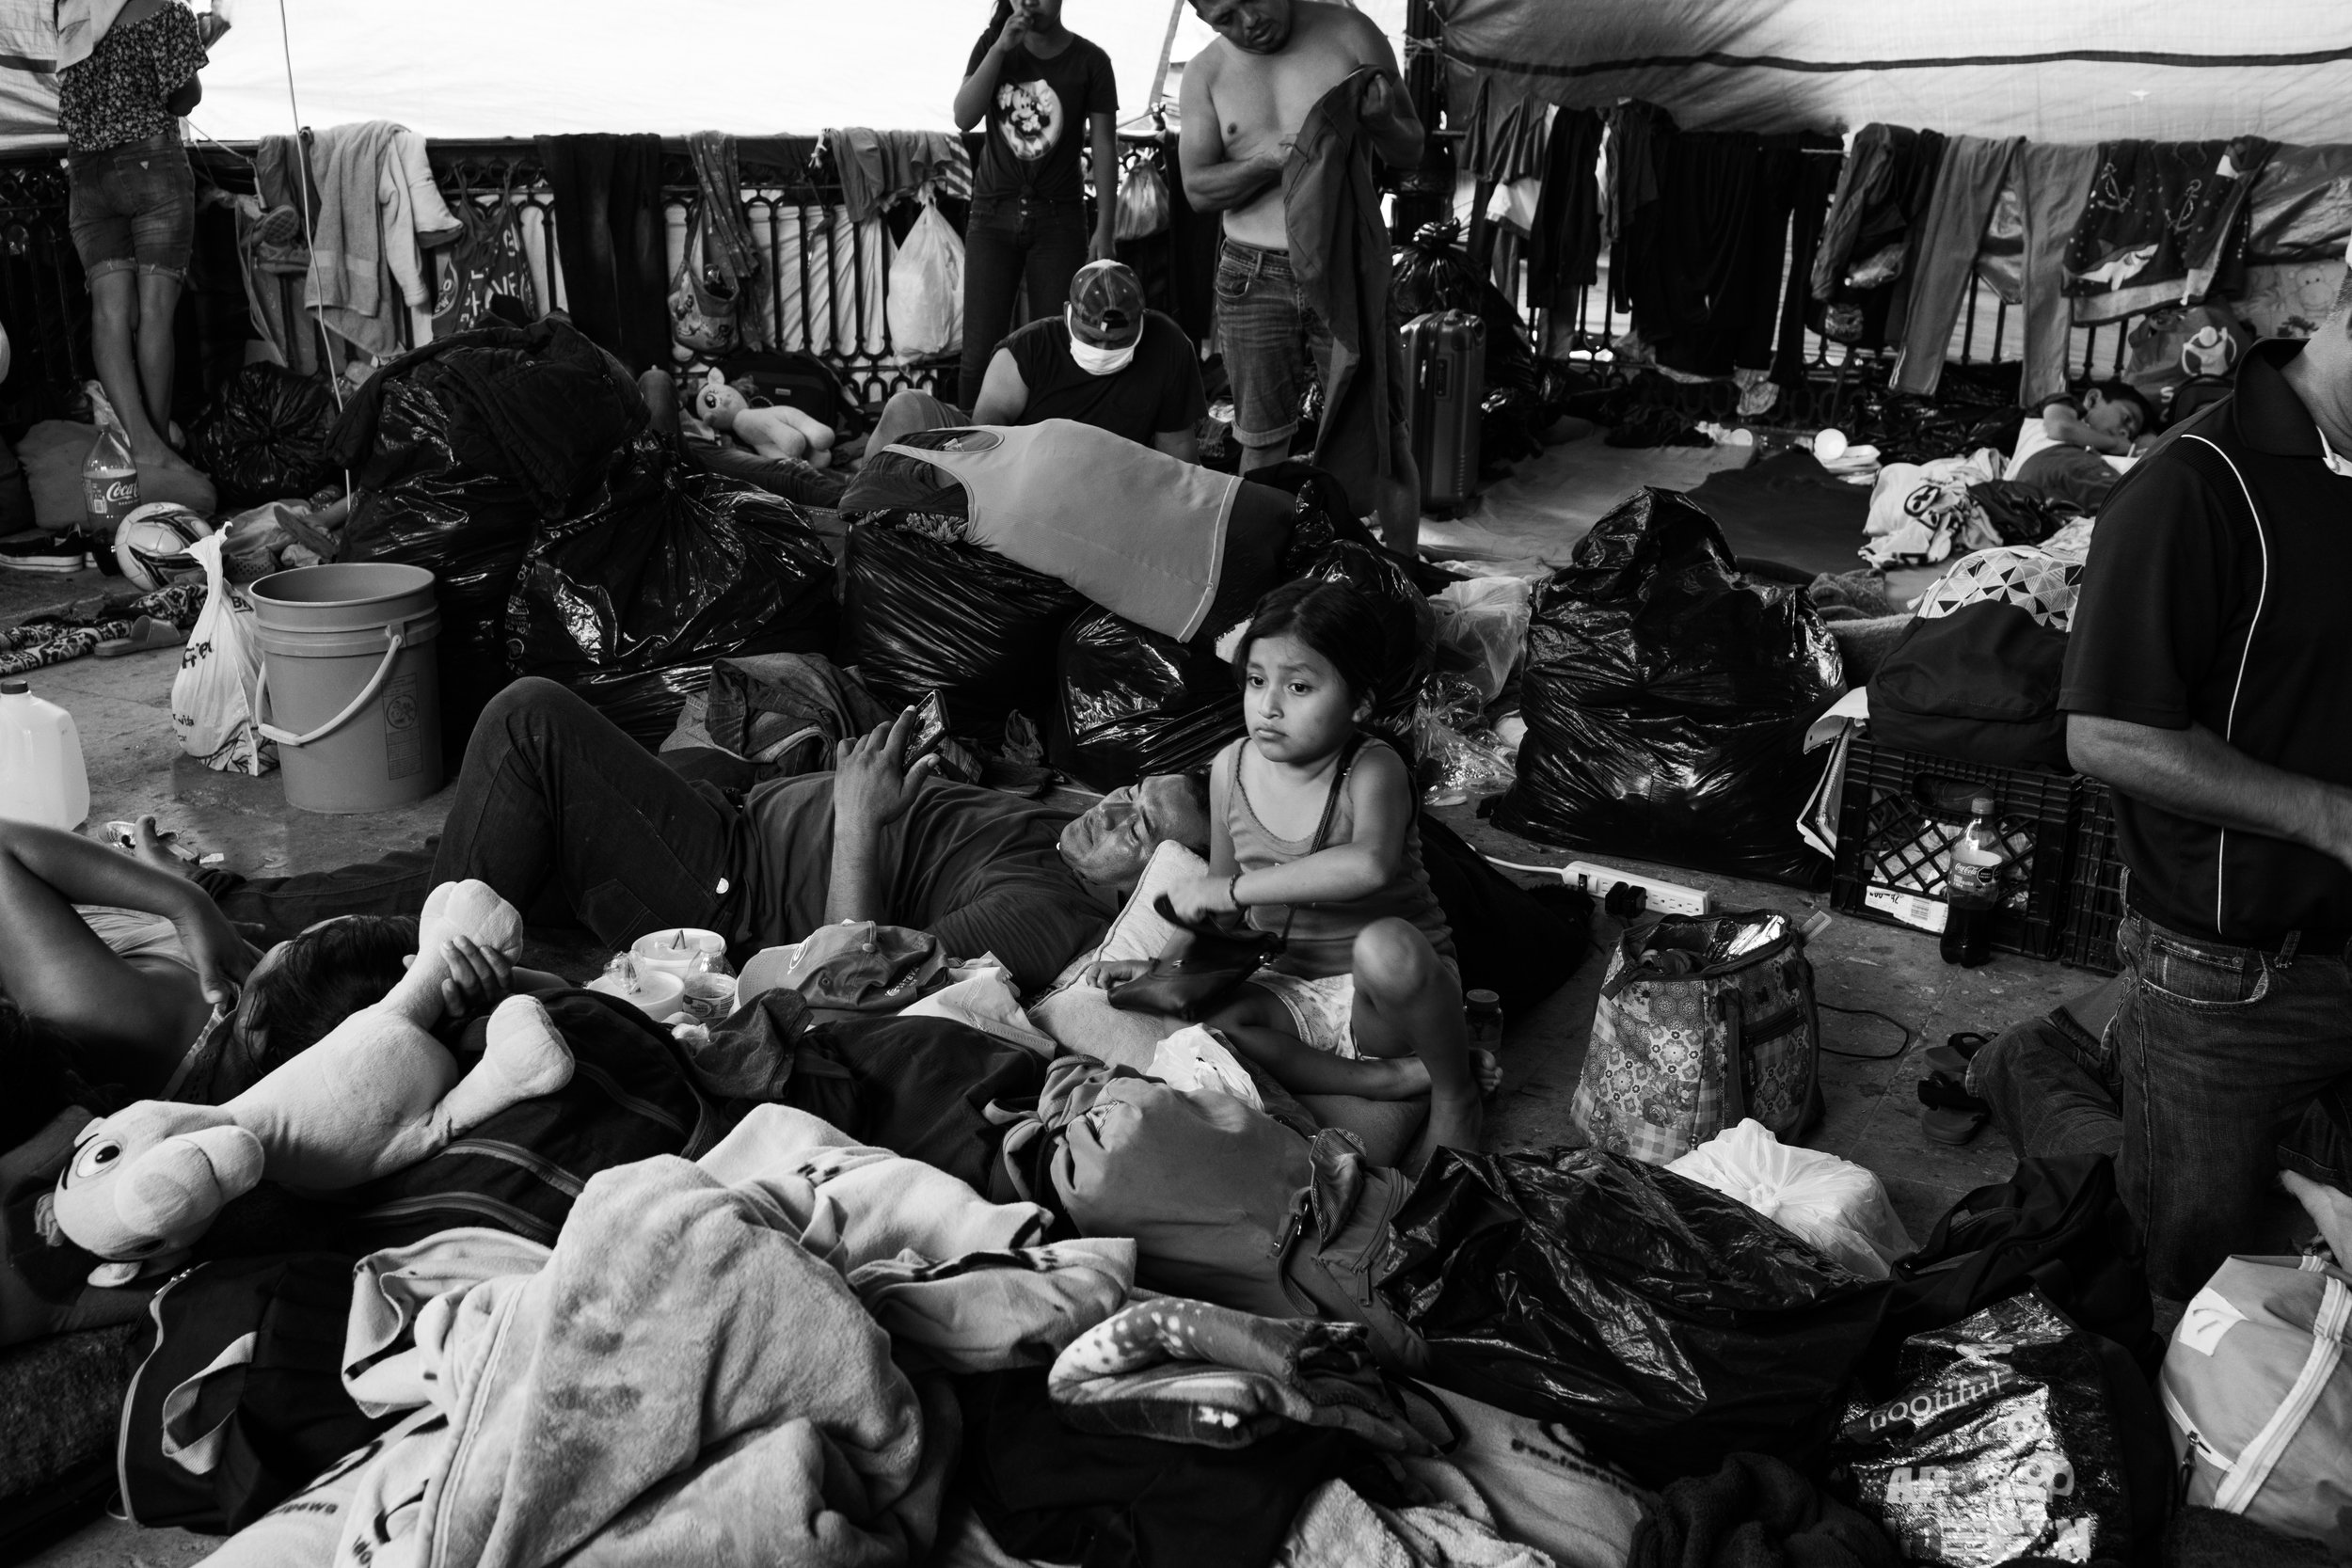  A young girl sits in an overcrowded sleeping space in Reynosa, Mexico. 